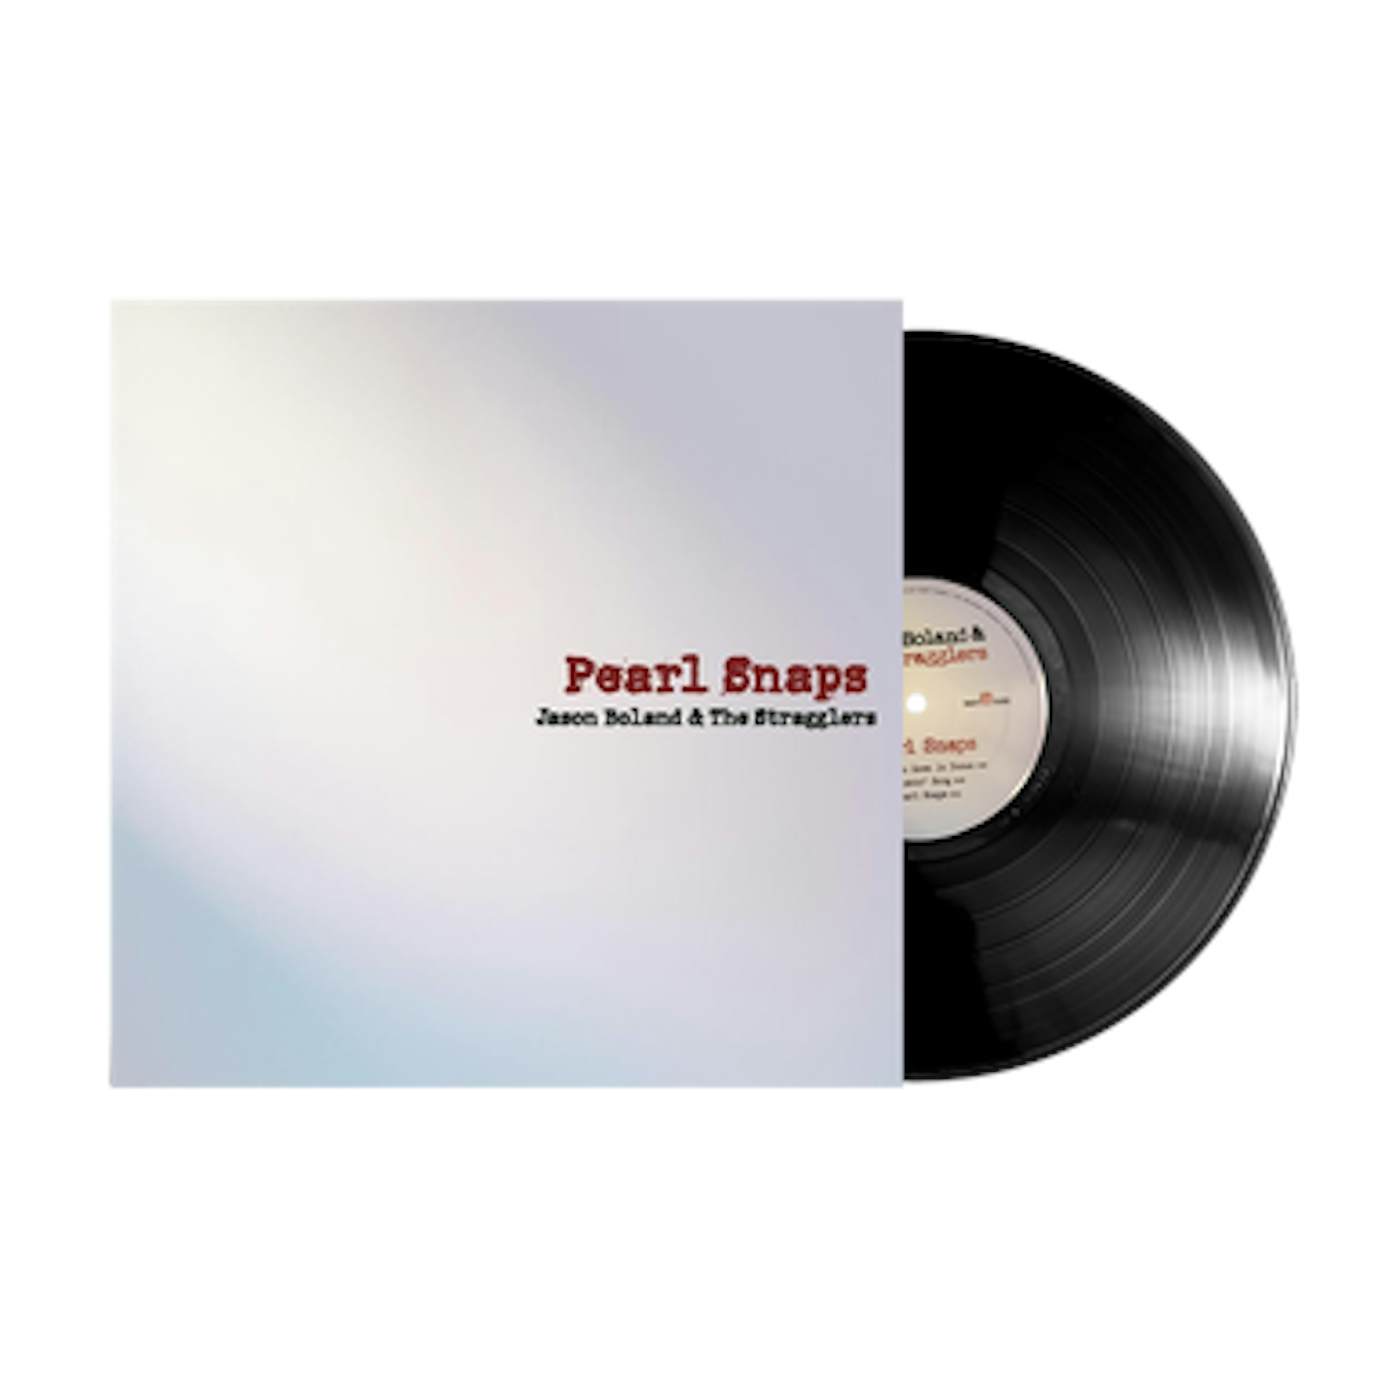 Jason Boland & The Stragglers Pearl Snaps - 20th Anniversary Double LP (Vinyl)